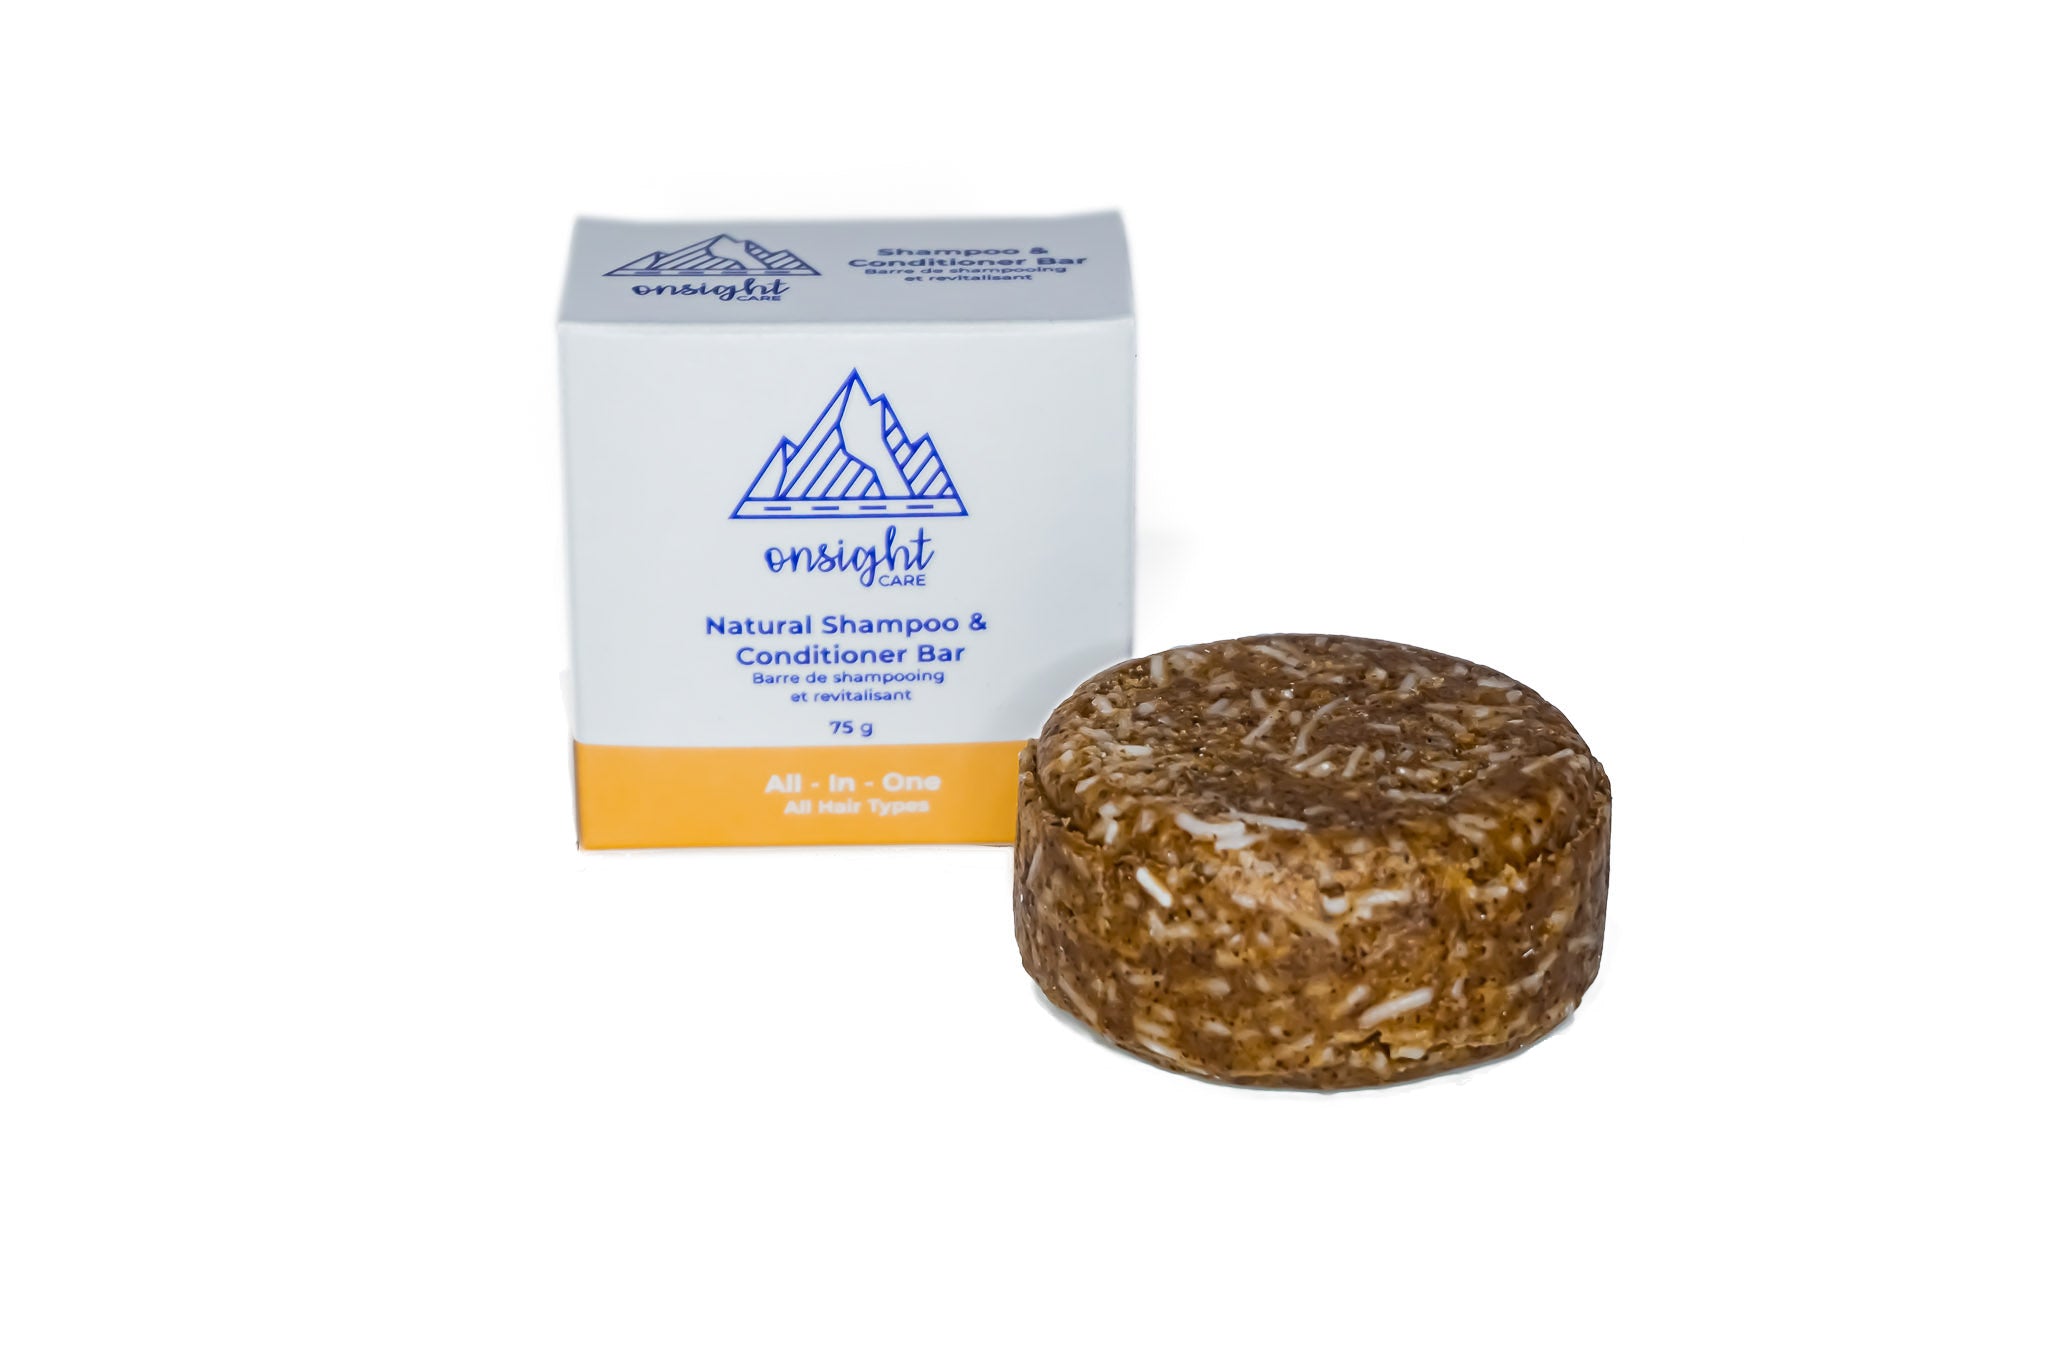 shampoo bar in front of eco friendly packaging on white background